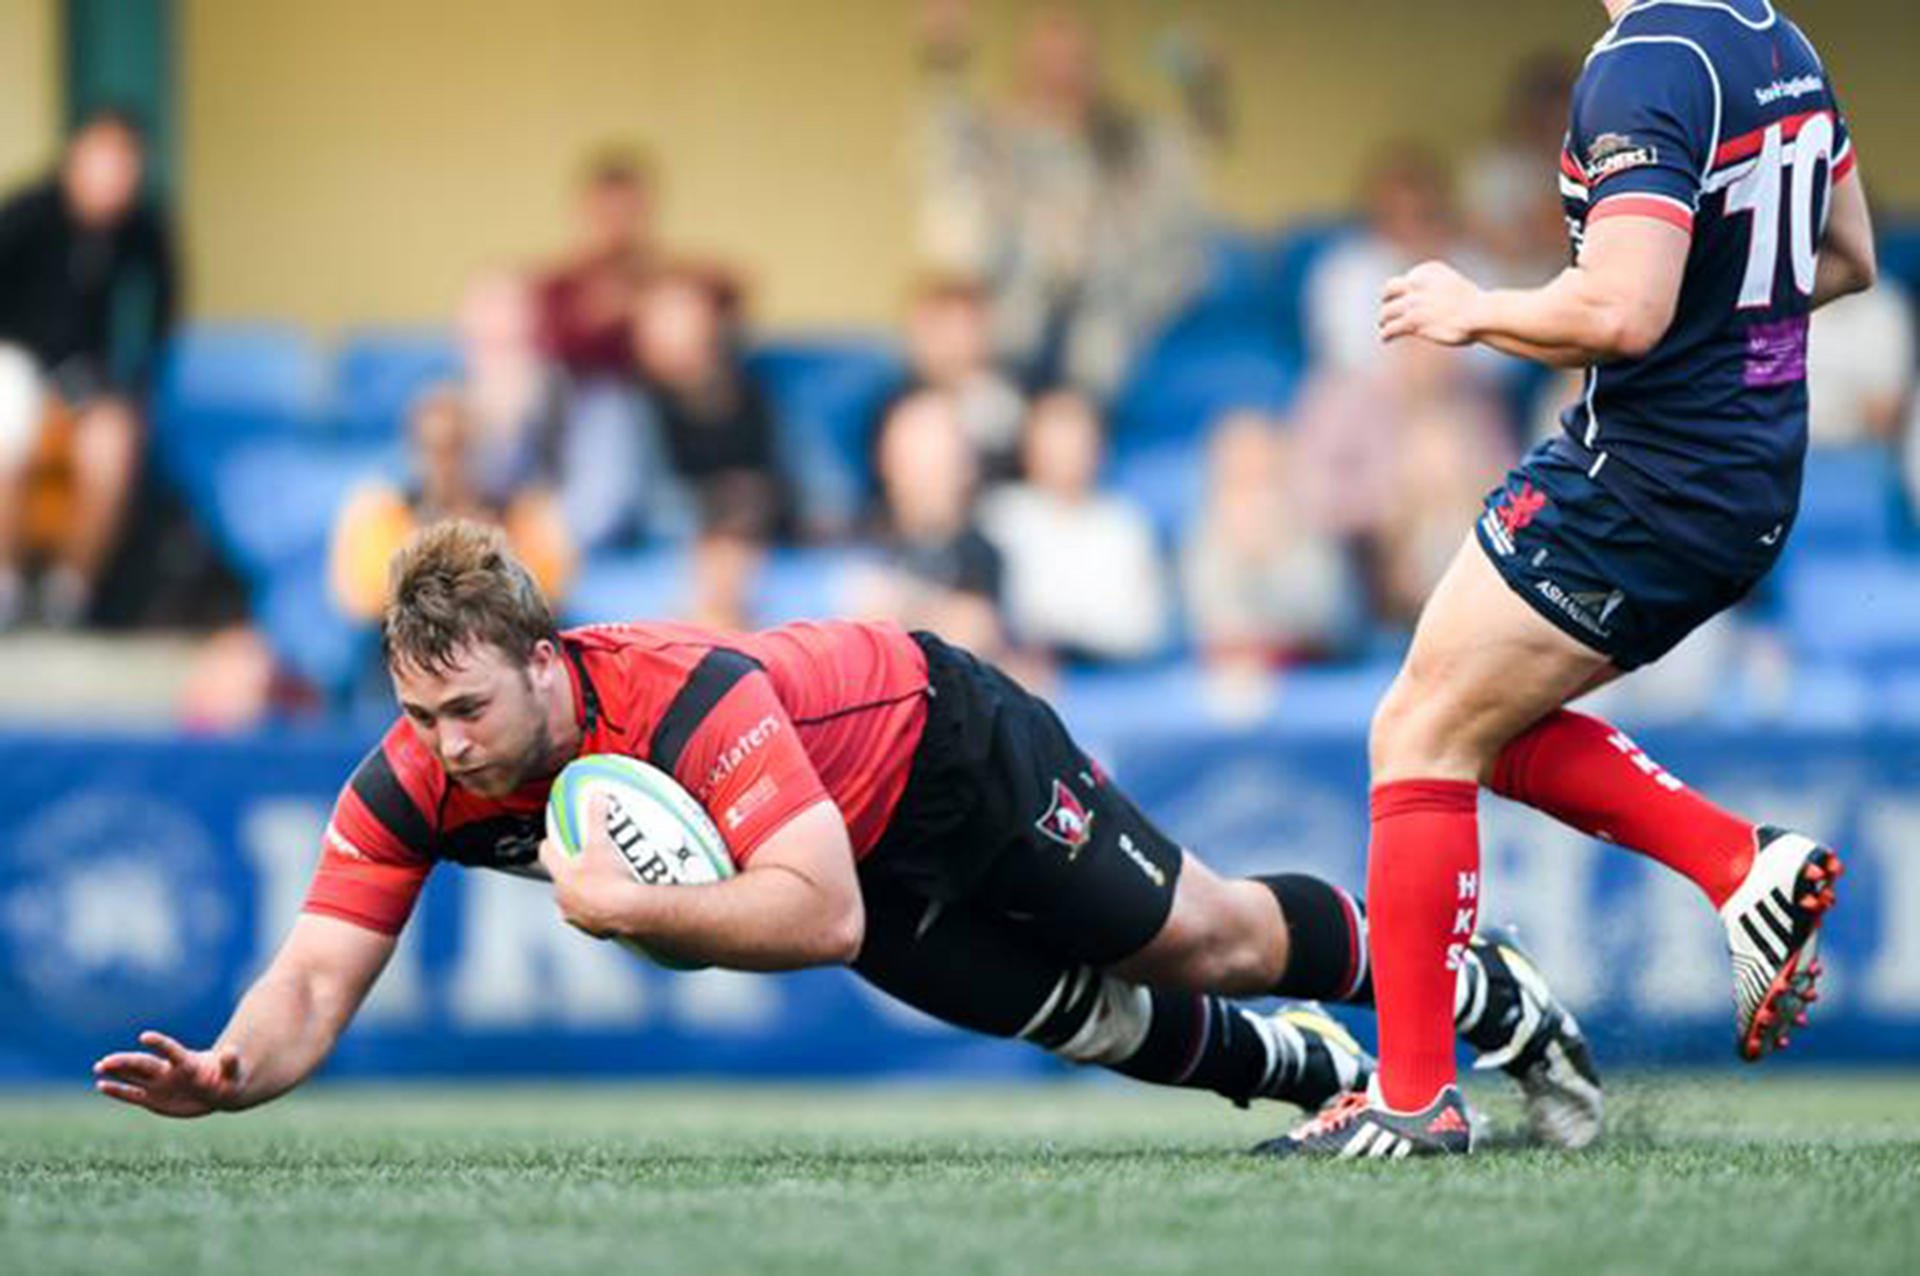 Dayne Jans dives over to score in Valley's 42-12 win over HK Scottish on Saturday. Photos: HKRFU